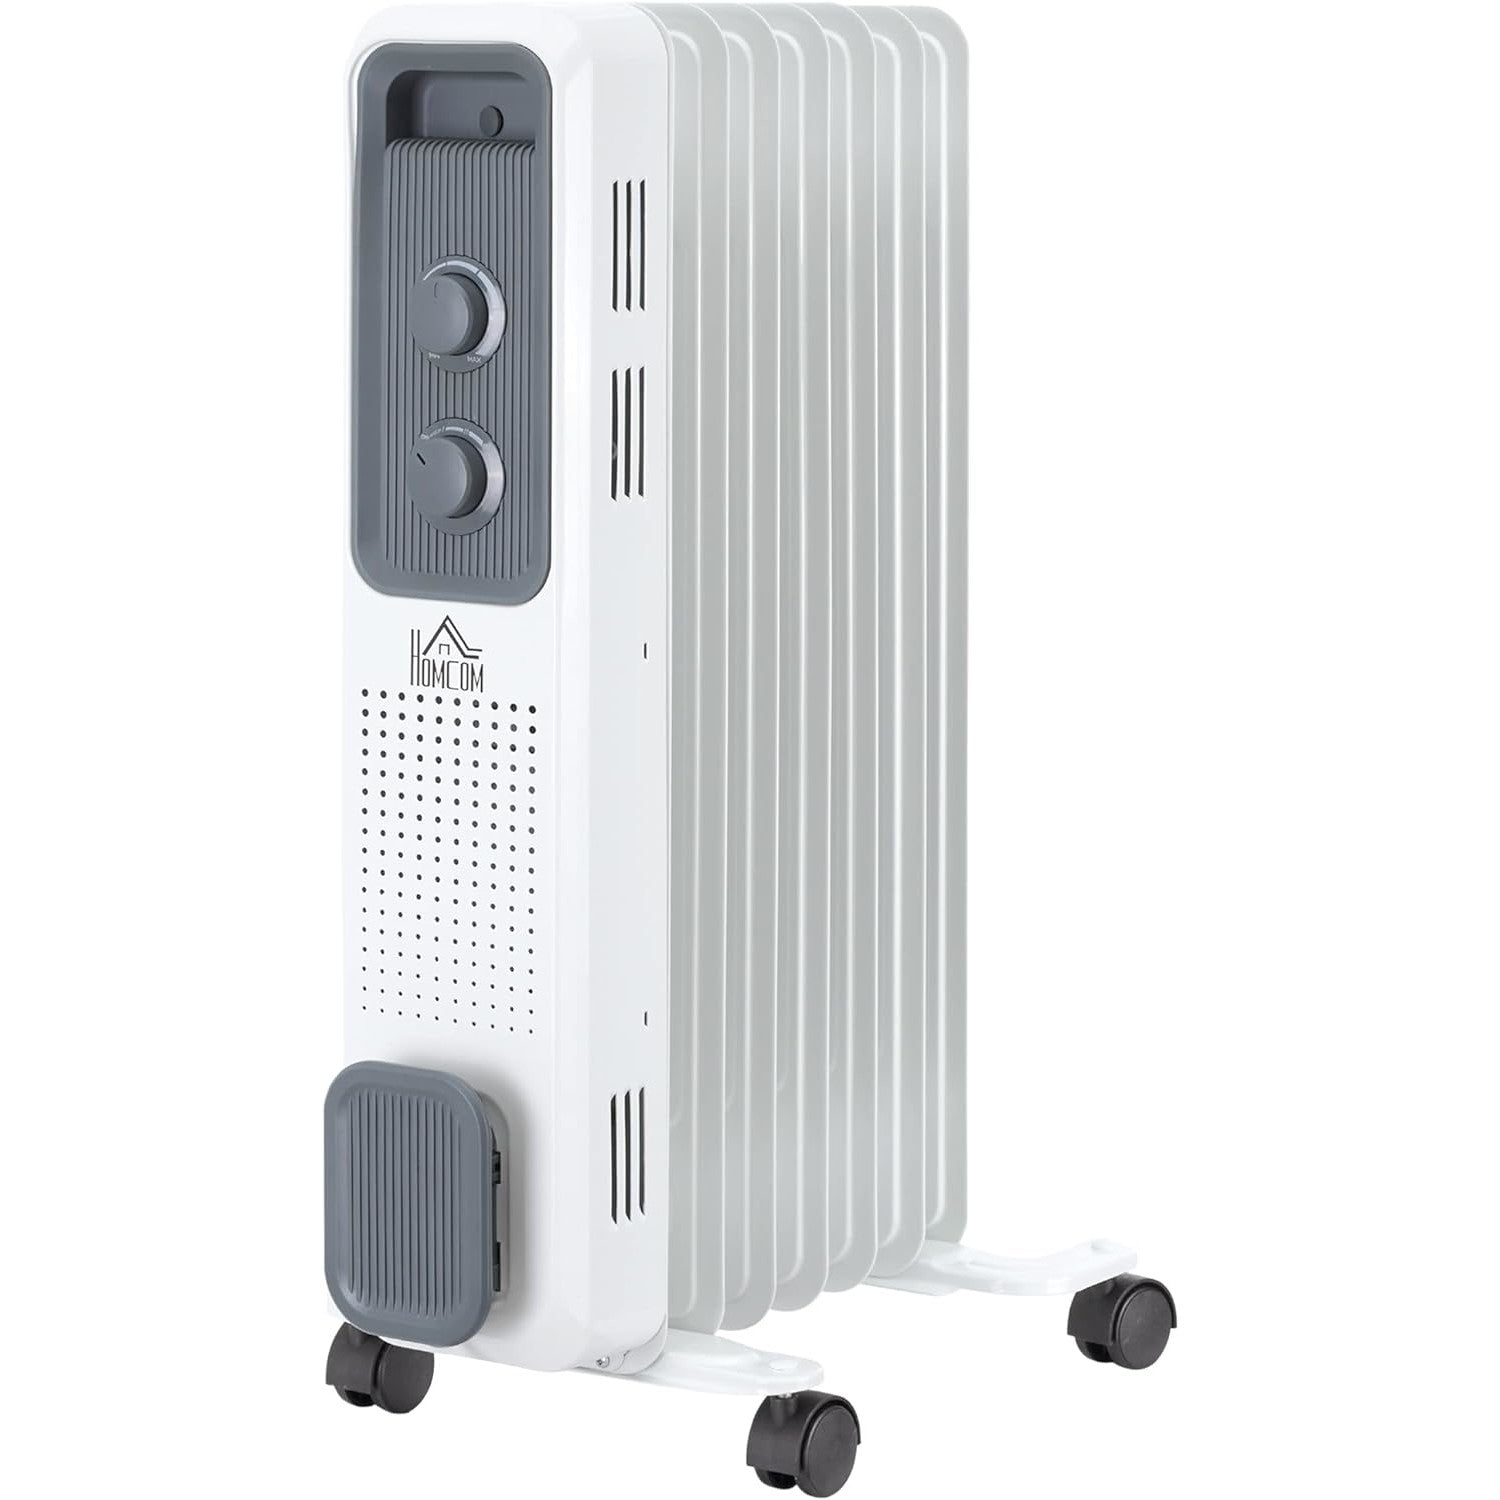 Maplin 7 Fin Portable Oil Filled Radiator with Three Heat Settings - White